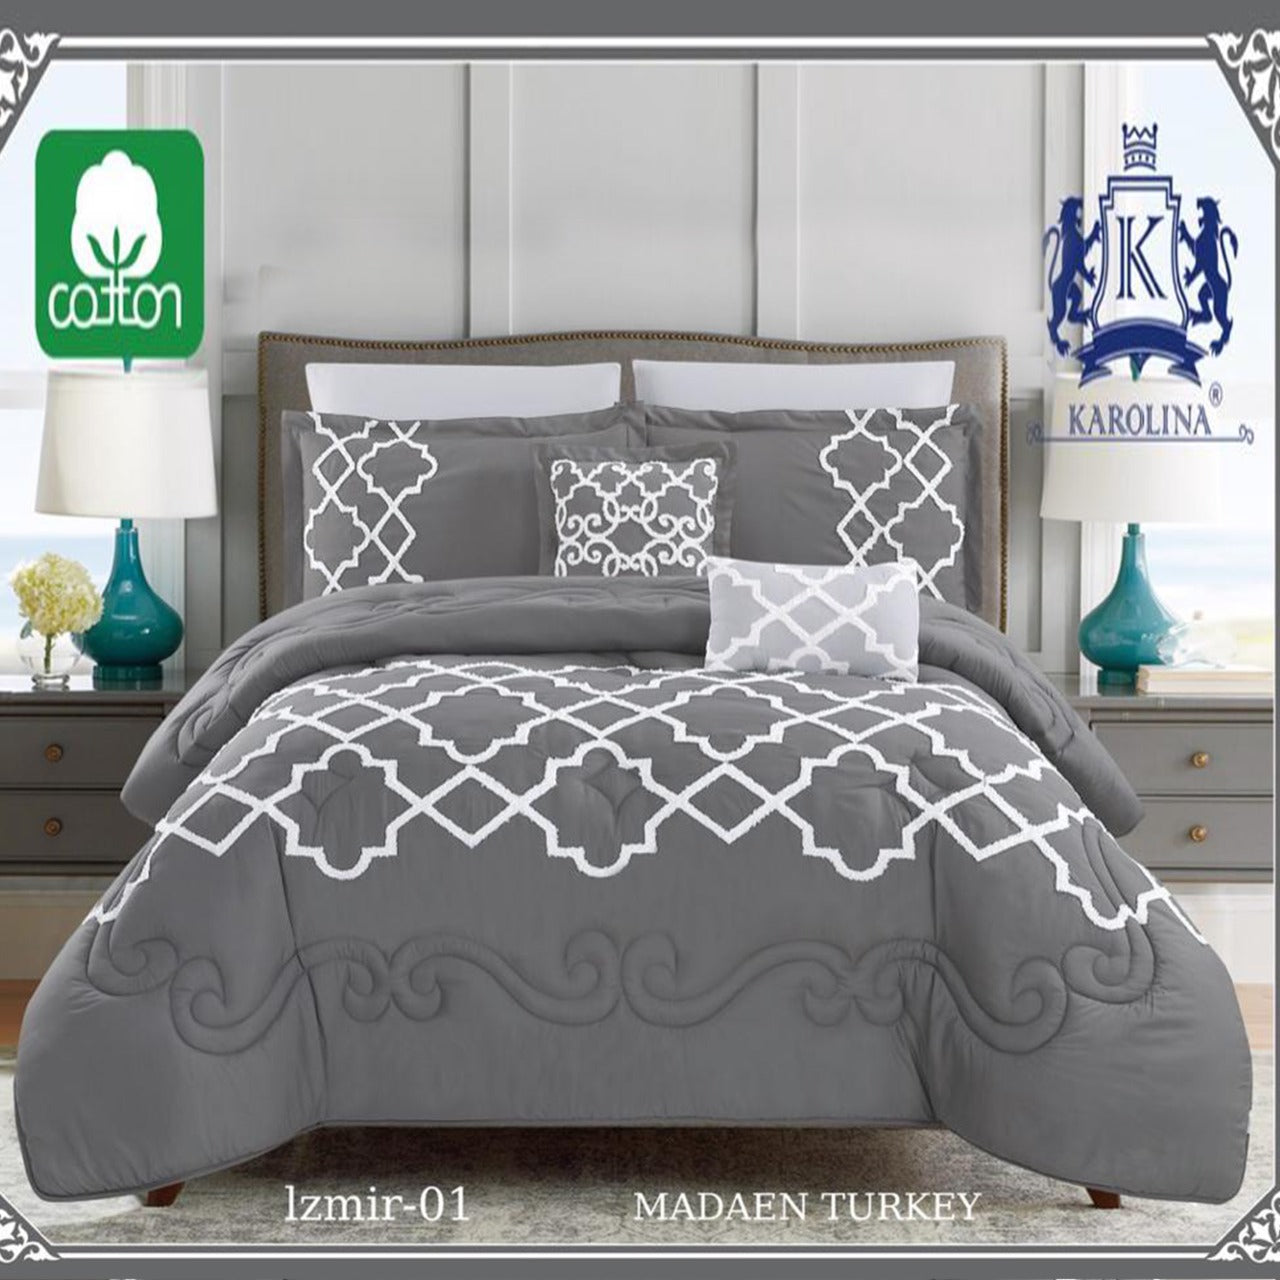 10 Piece Comforter Bedding With Sheet and Decorative Pillow Shams | Made in Turkey Izmir - 01 Zaappy